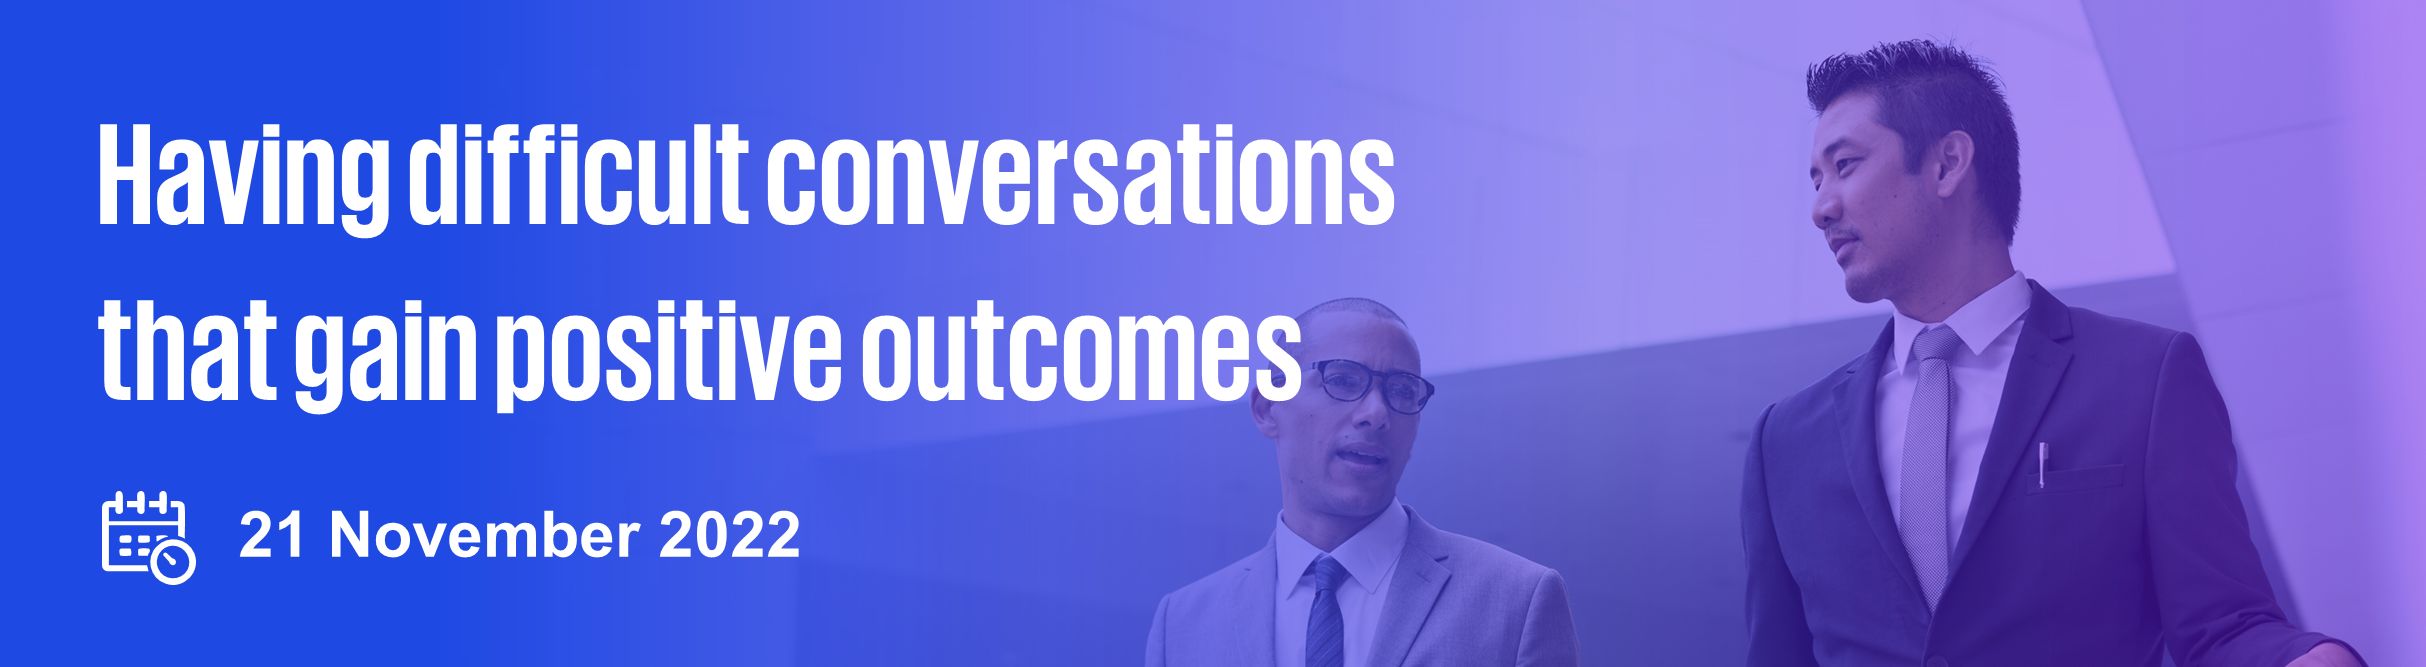 Having difficult conversations that gain positive outcomes